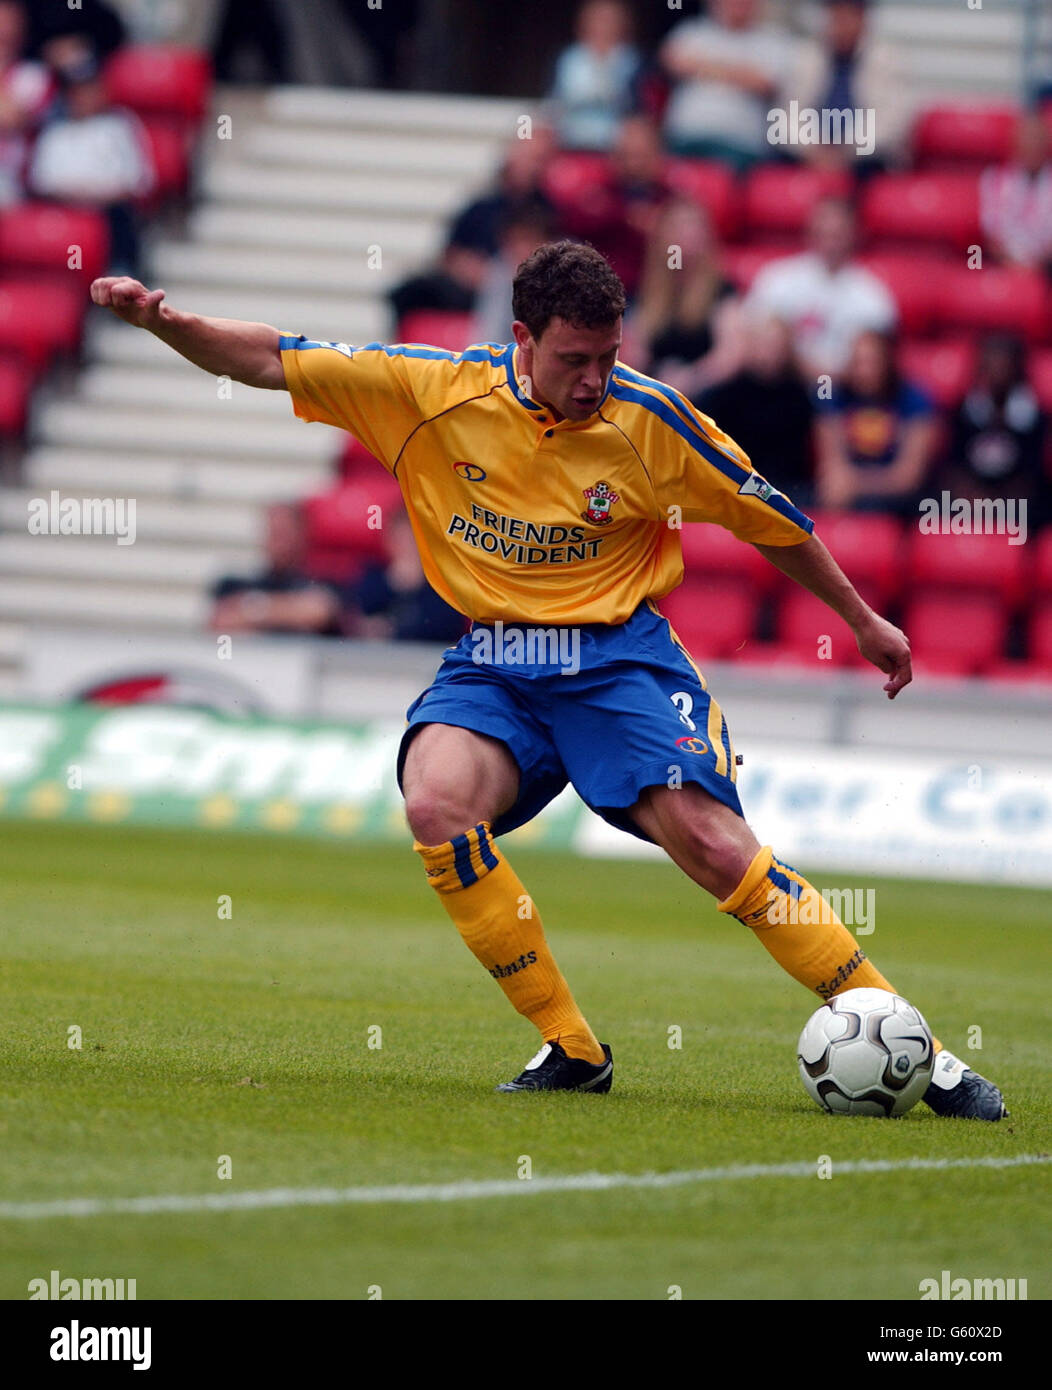 Wayne Bridge in action during the pre-season friendly game between Southampton and FC Utrecht at St Mary's stadium, Southampton. Stock Photo